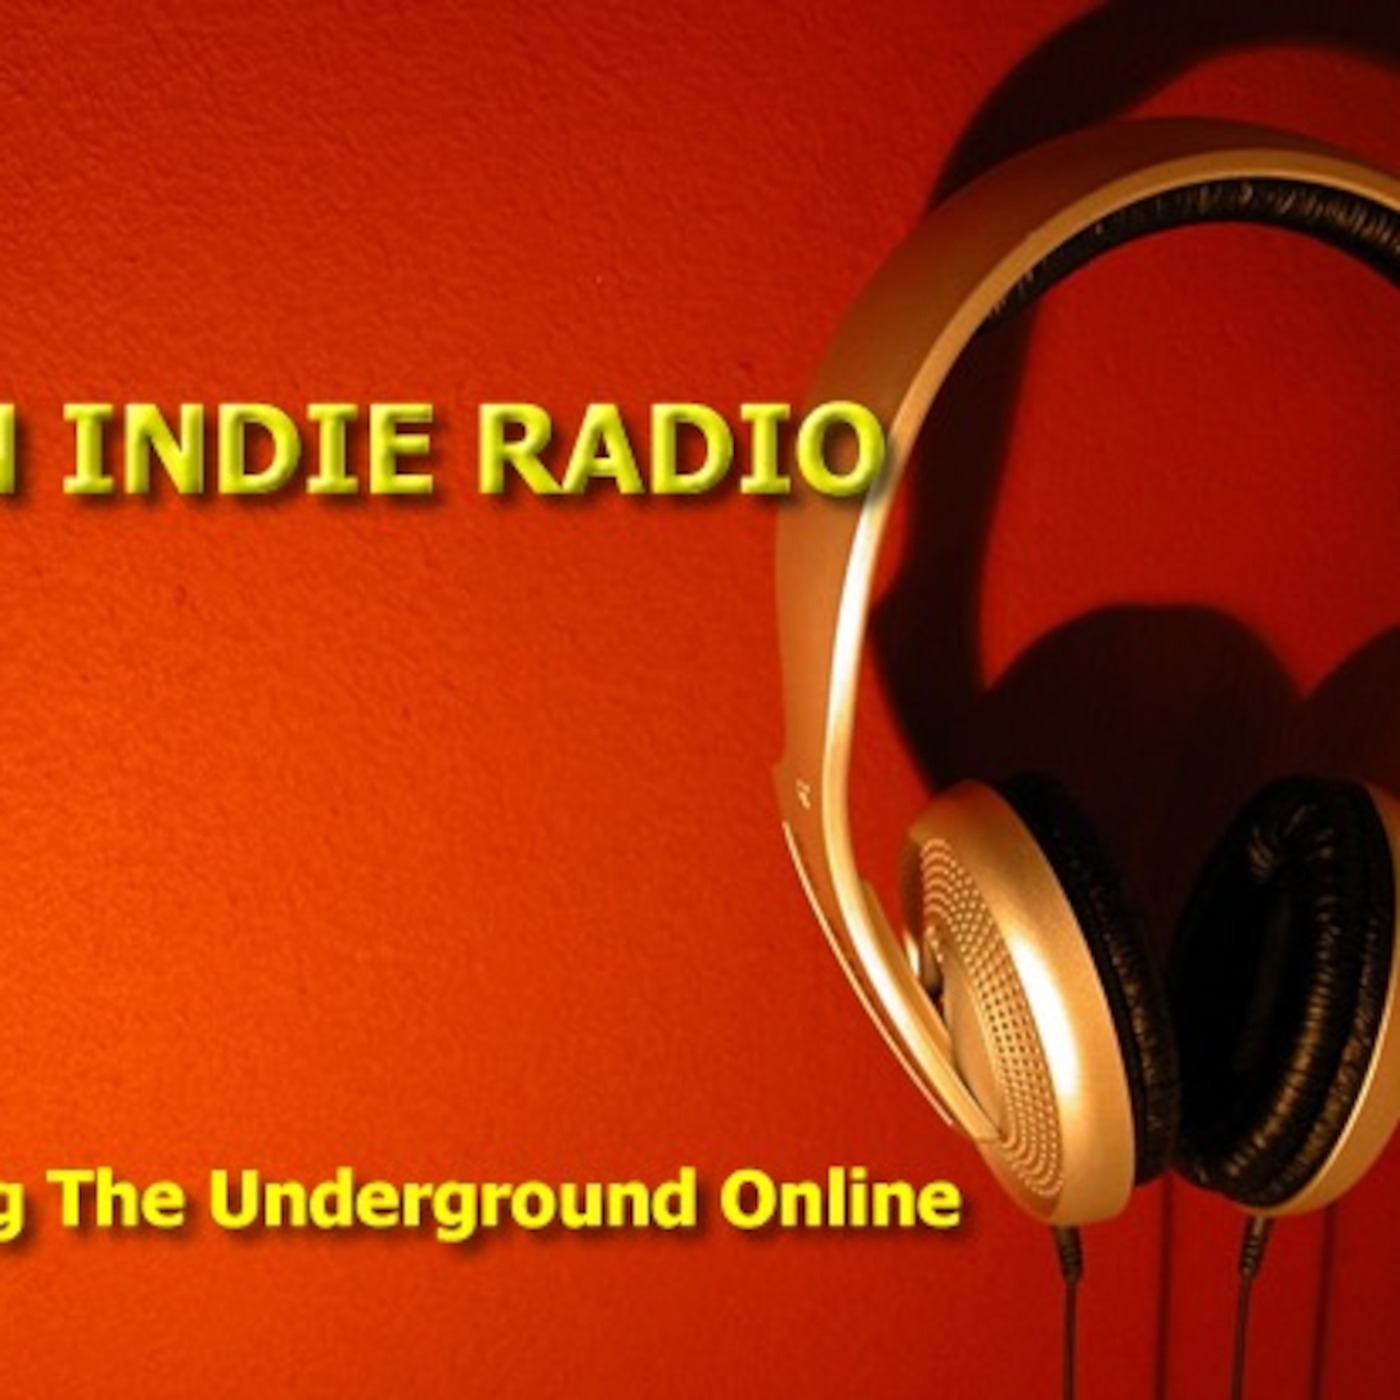 Indie Radio AM Launches Show With Special Guest UK Diva/Songstress Kyra Simone